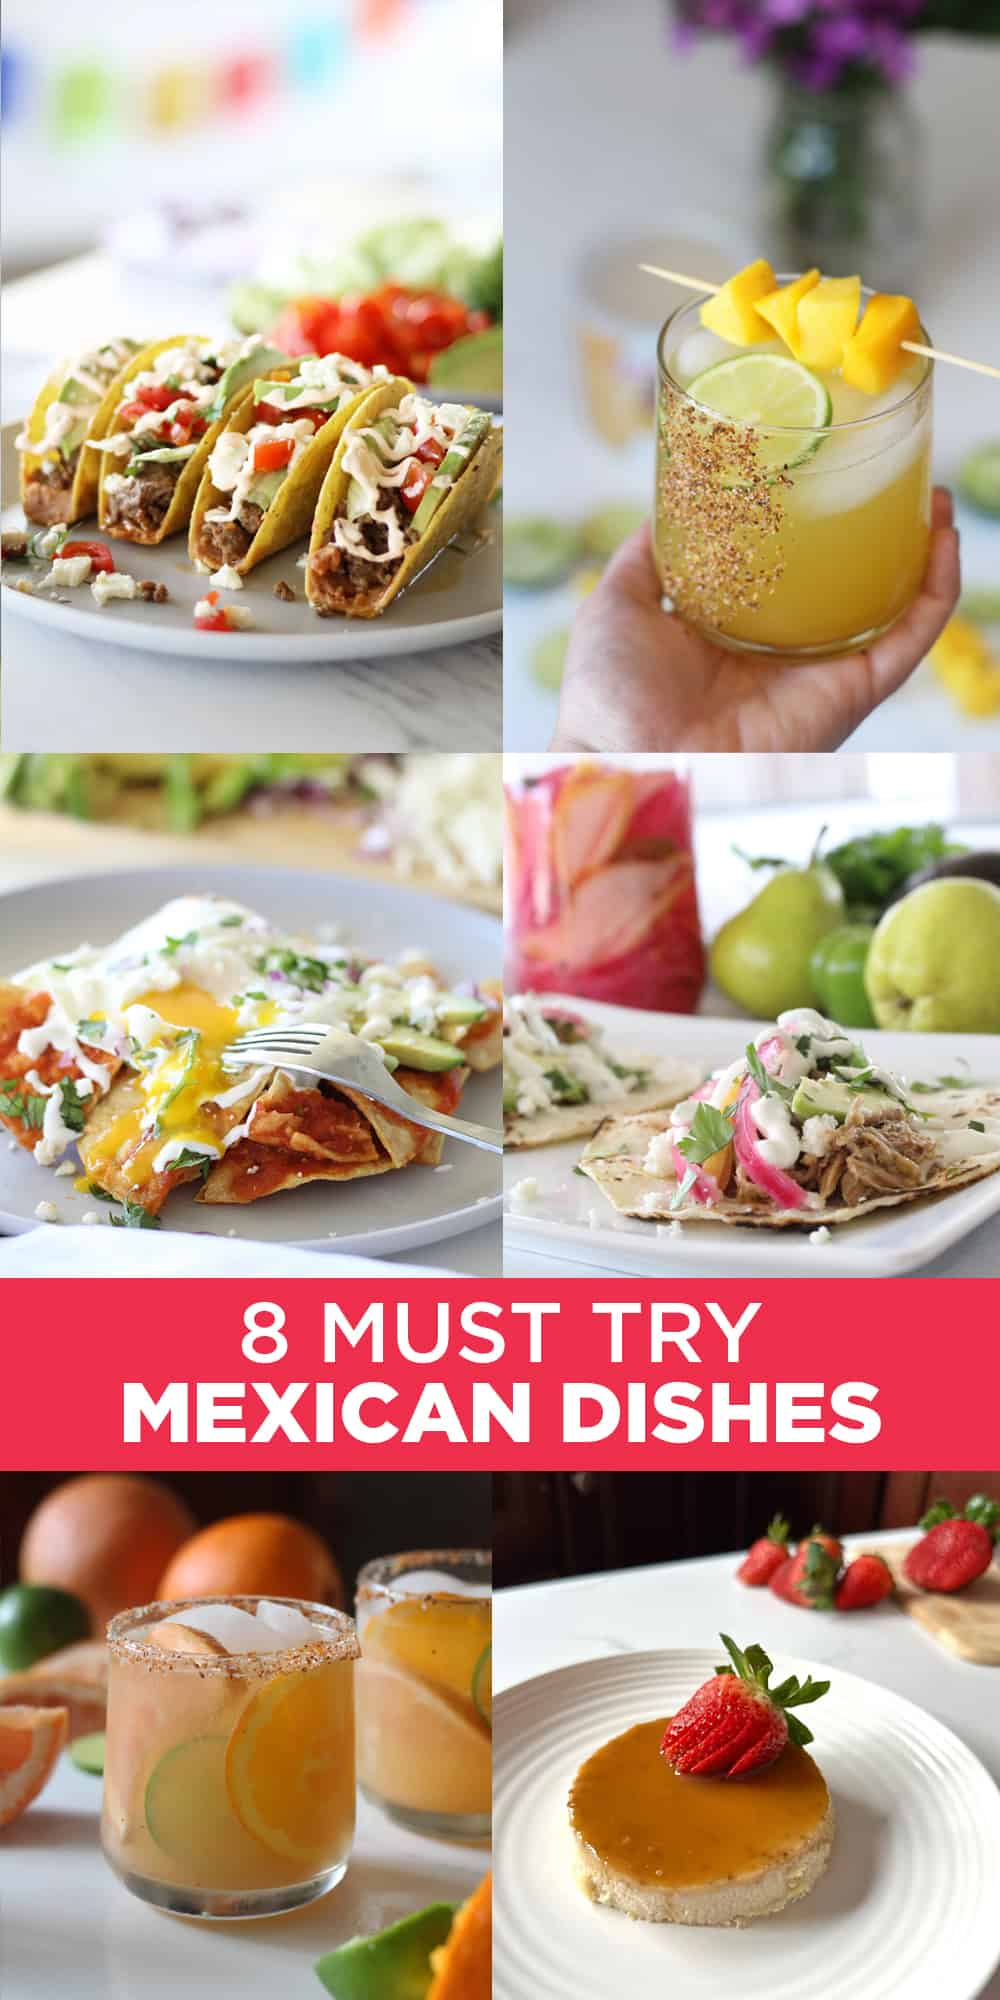 8 Must-Try Mexican Dishes